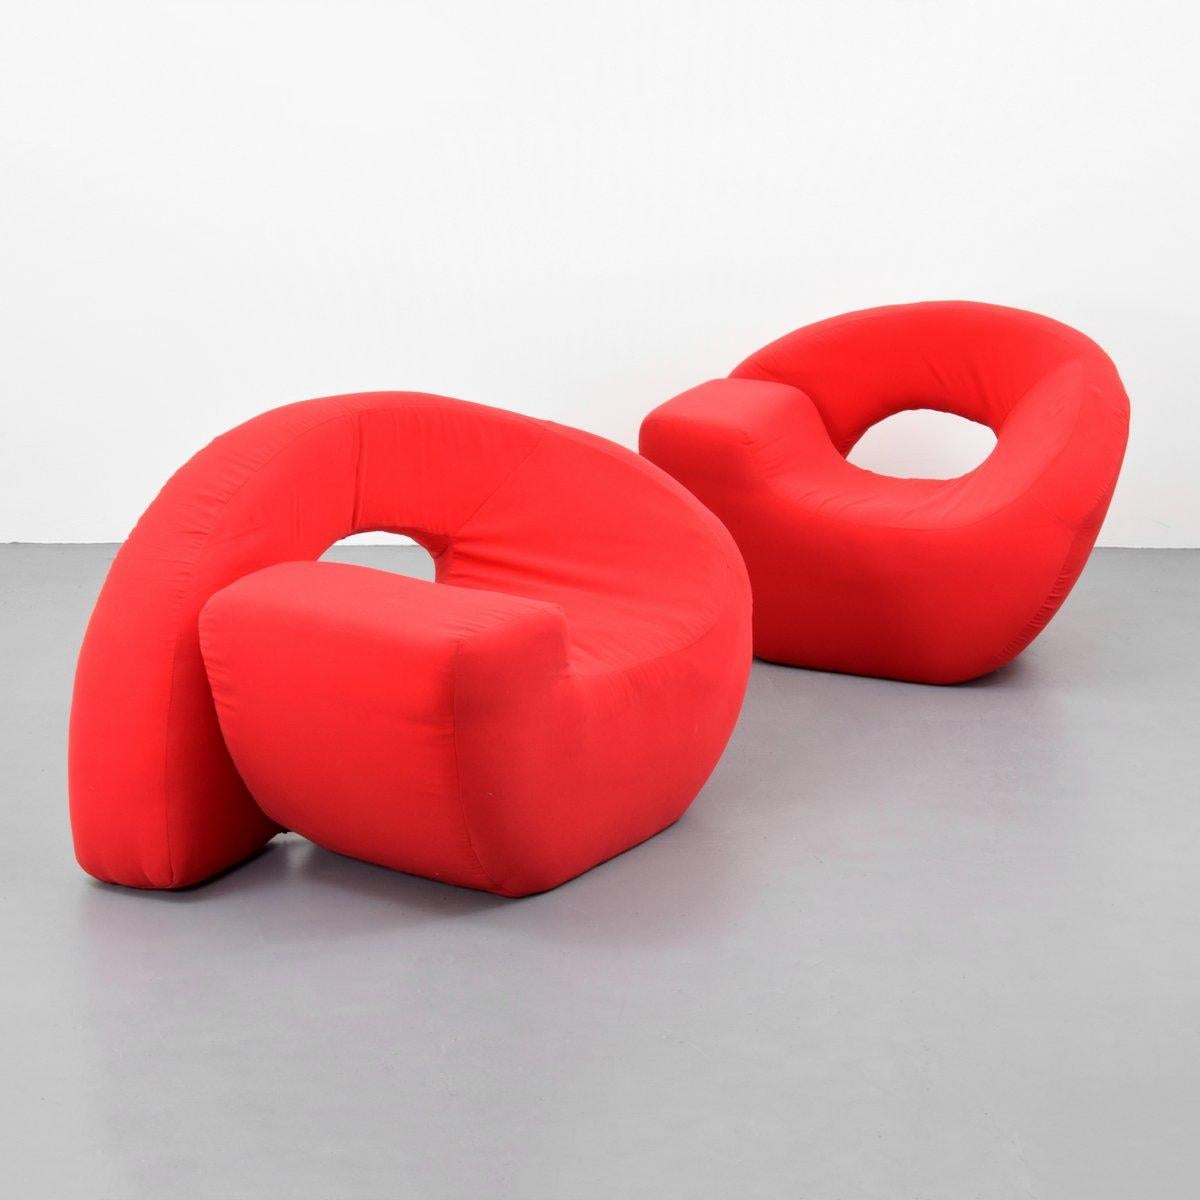 Pair of Sess Longue lounge chairs by Nani Prina. Reference: 1000 chairs, Charlotte and Peter Fiell, pg. 397.